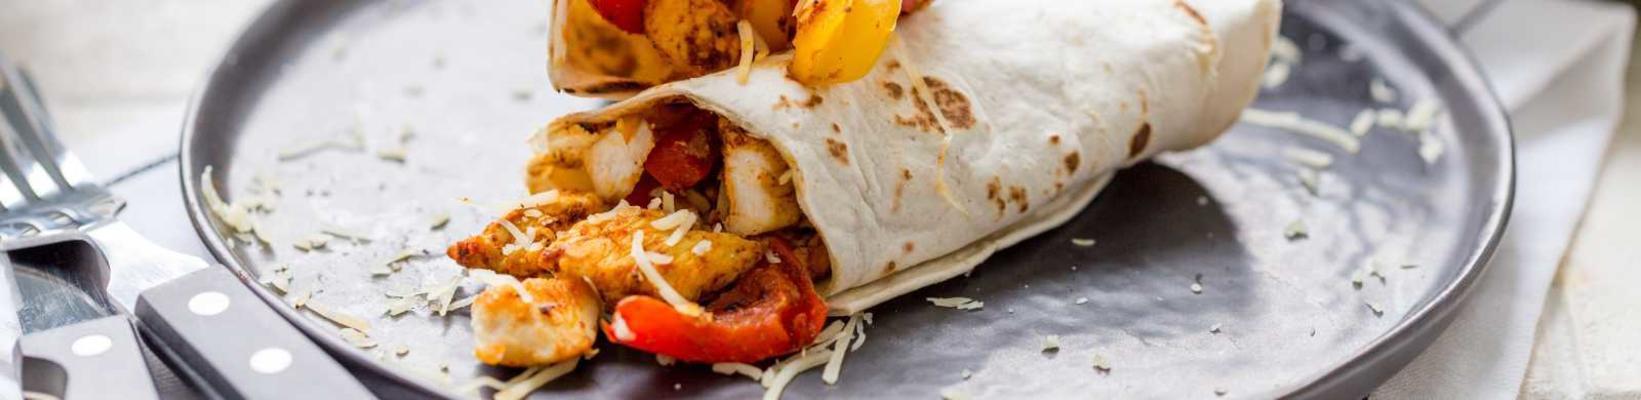 wraps with chicken breast and paprika